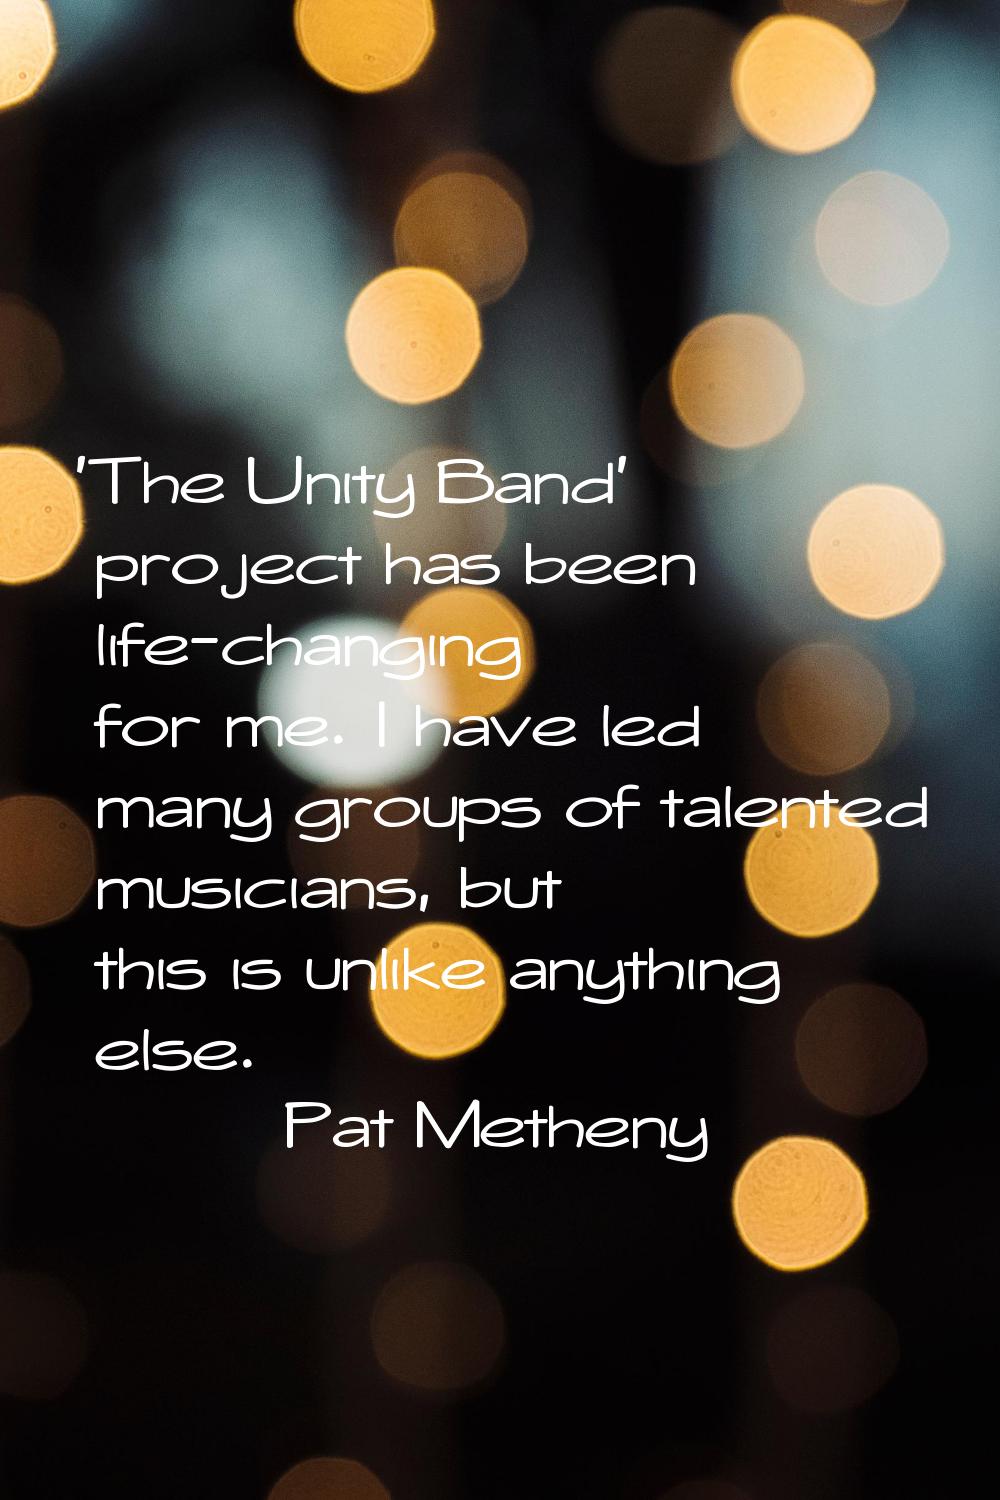 'The Unity Band' project has been life-changing for me. I have led many groups of talented musician